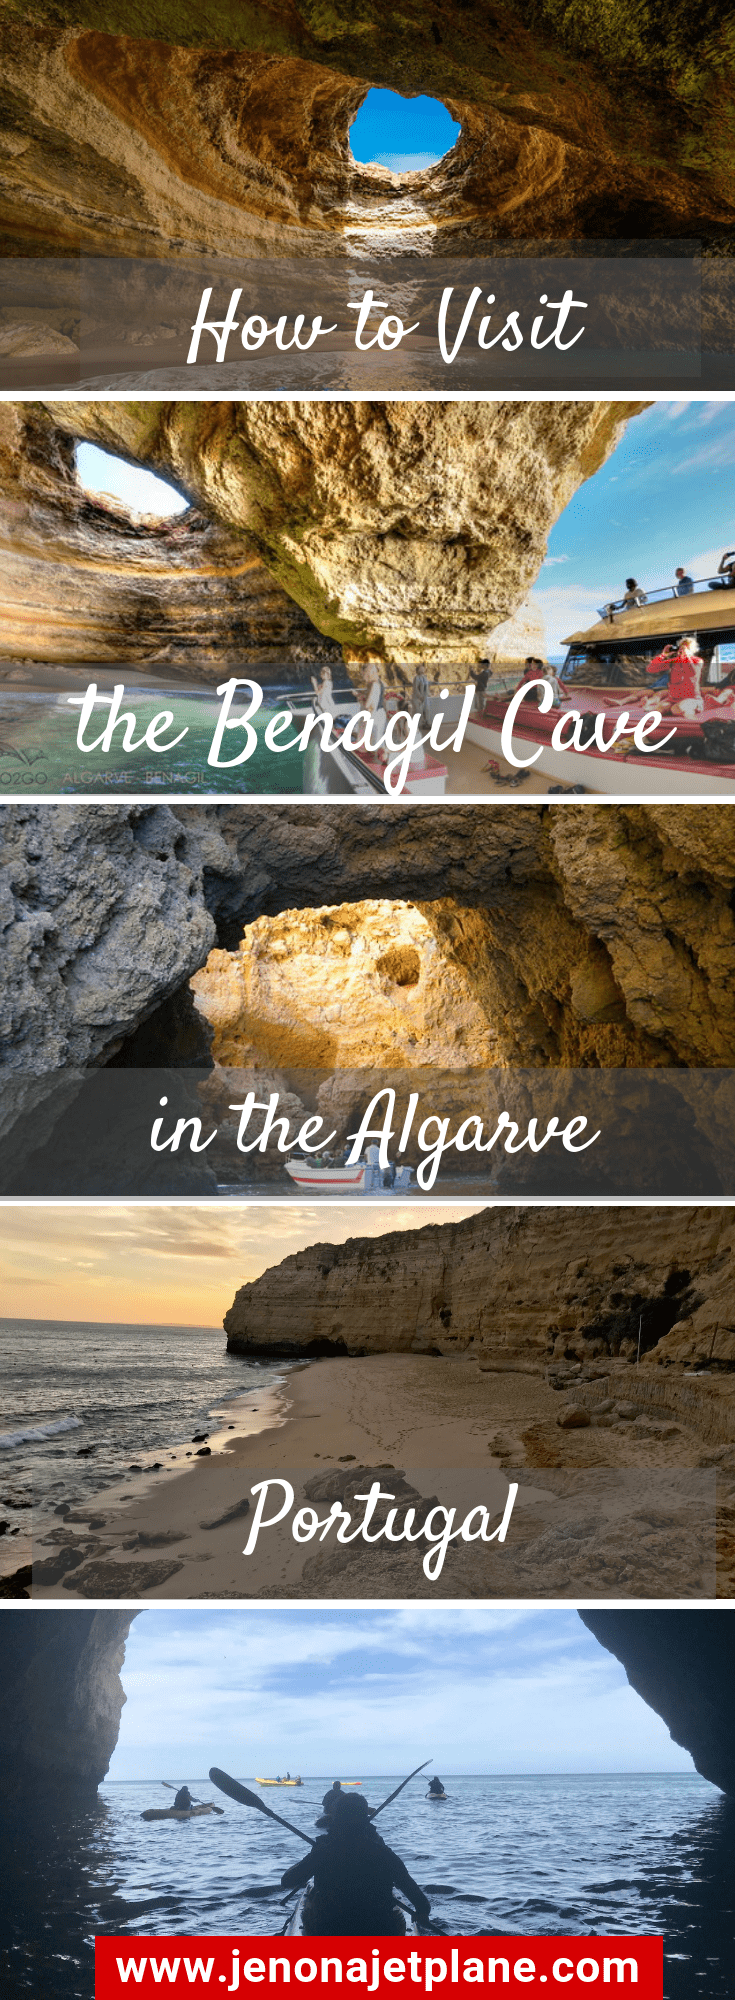 There's only 4 ways to visit the Benagil Sea Cave in the Algarve, Portugal. Find out which method of access is best for you in this post. Save to your travel board for future reference! #benagilseacave #benagilcave #algarveportugal